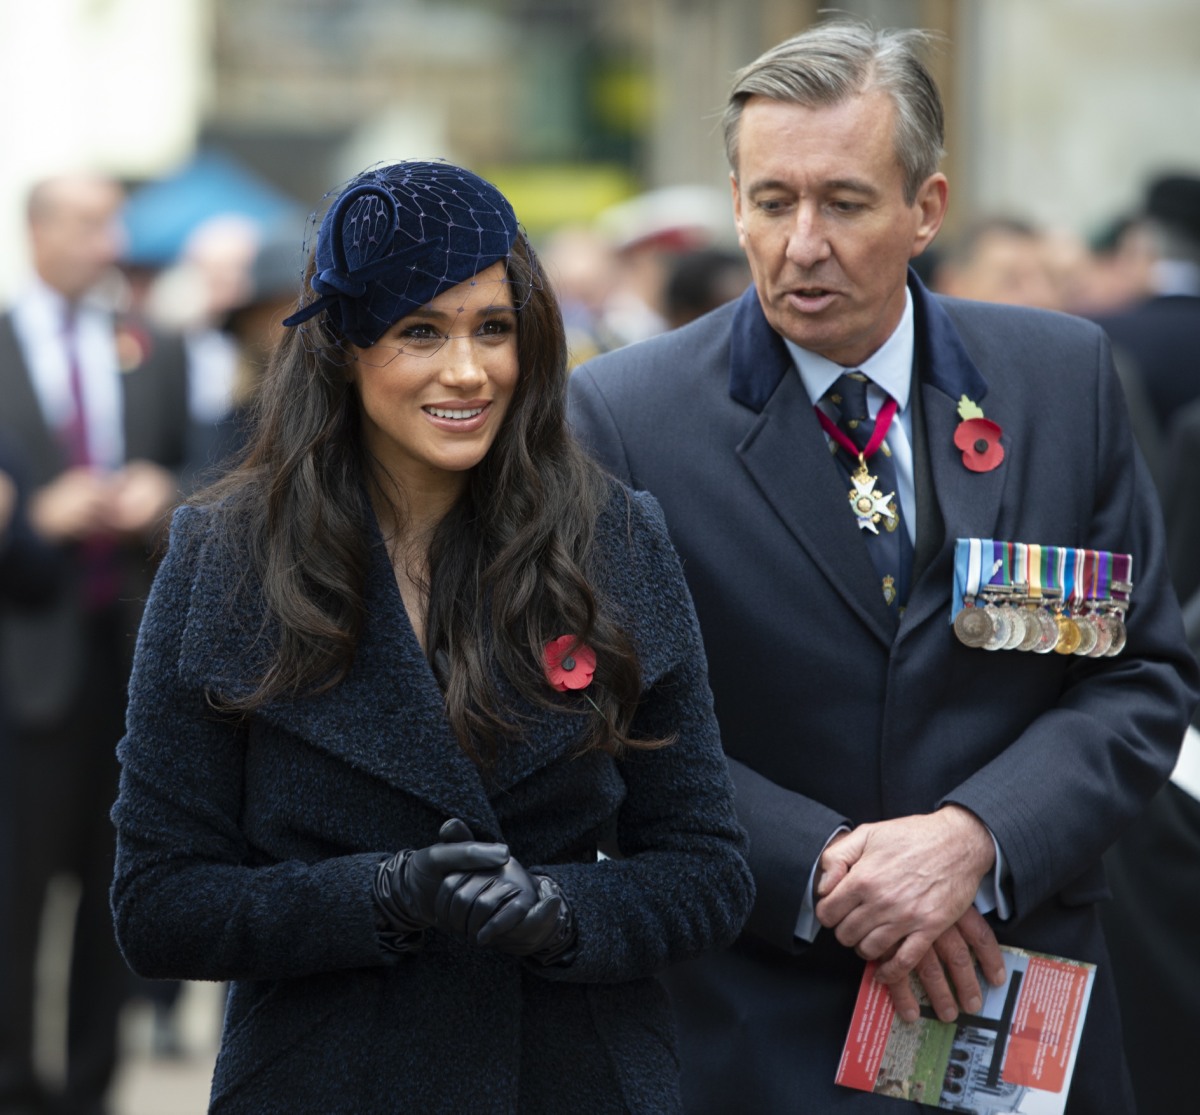 Mcc0092366 The Duke and Duchess of Sussex attend the 91st Field of Remembrance at Westminster Abbey, meeting veterans